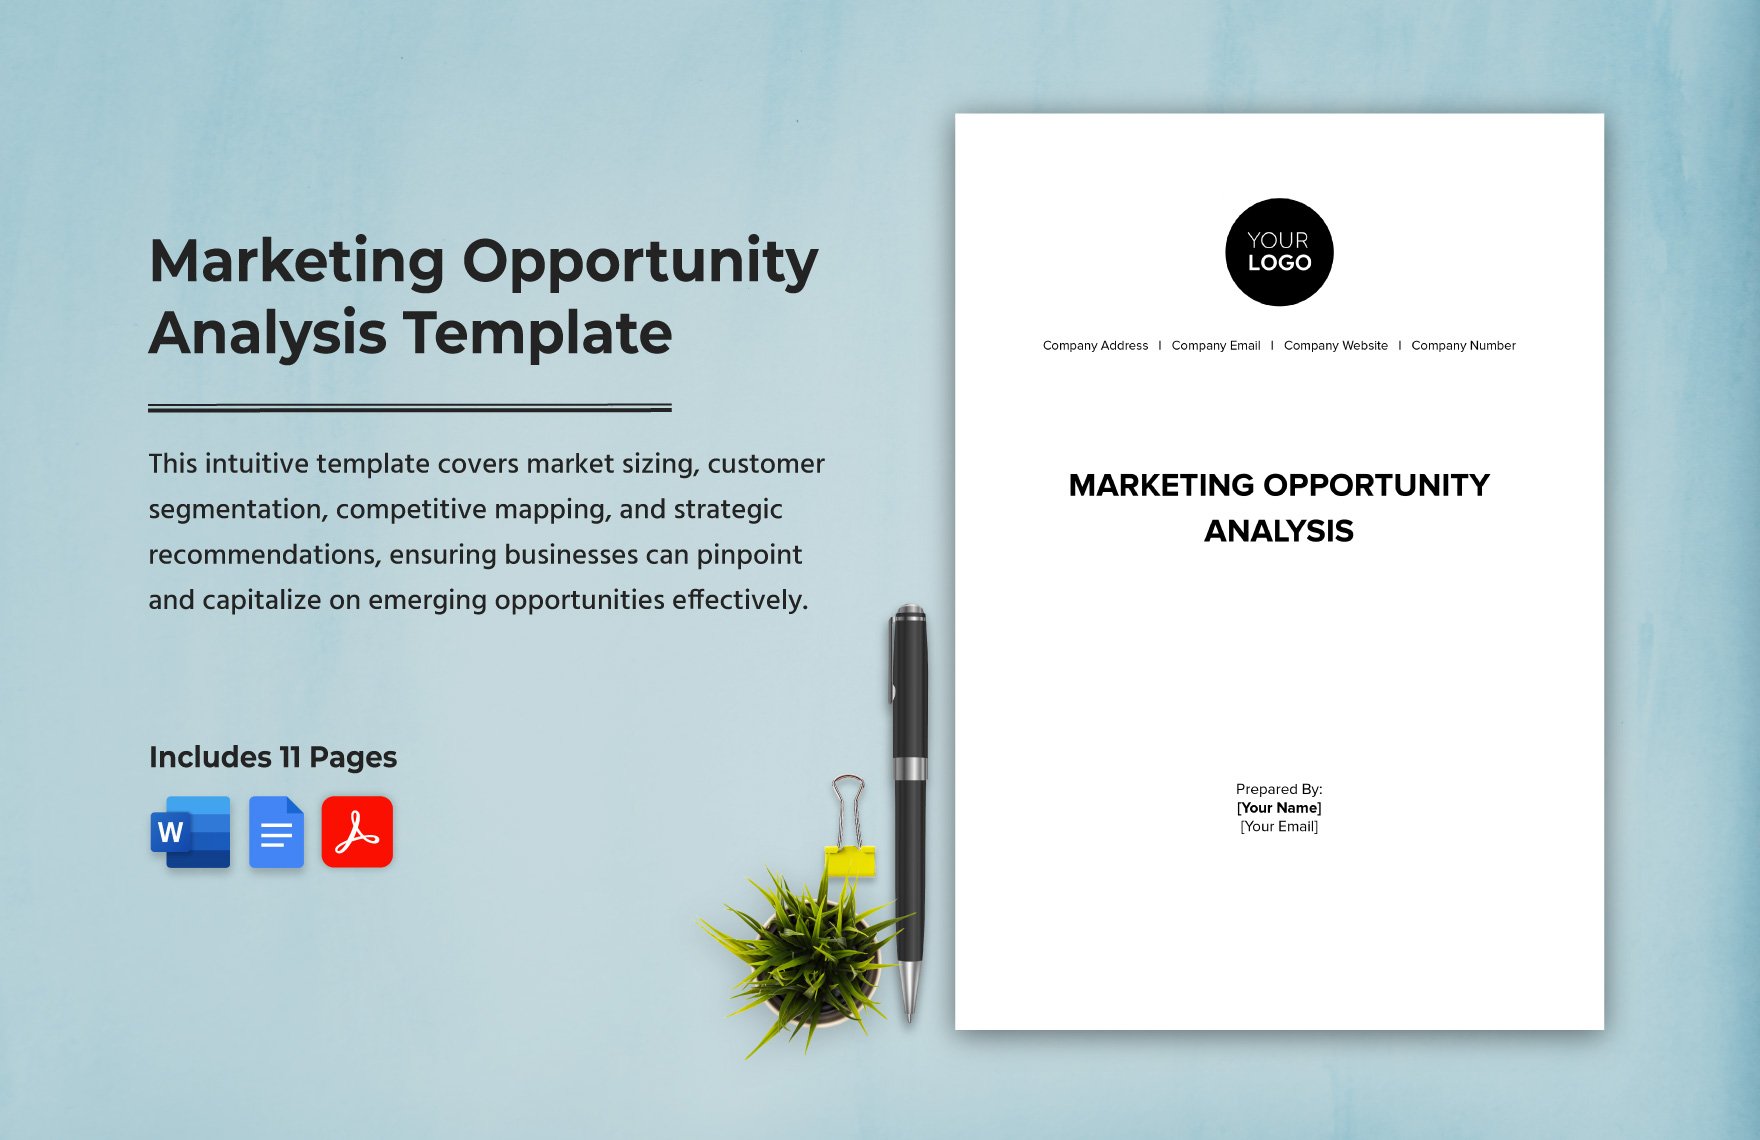 Marketing Opportunity Analysis Template in Word, Google Docs, PDF